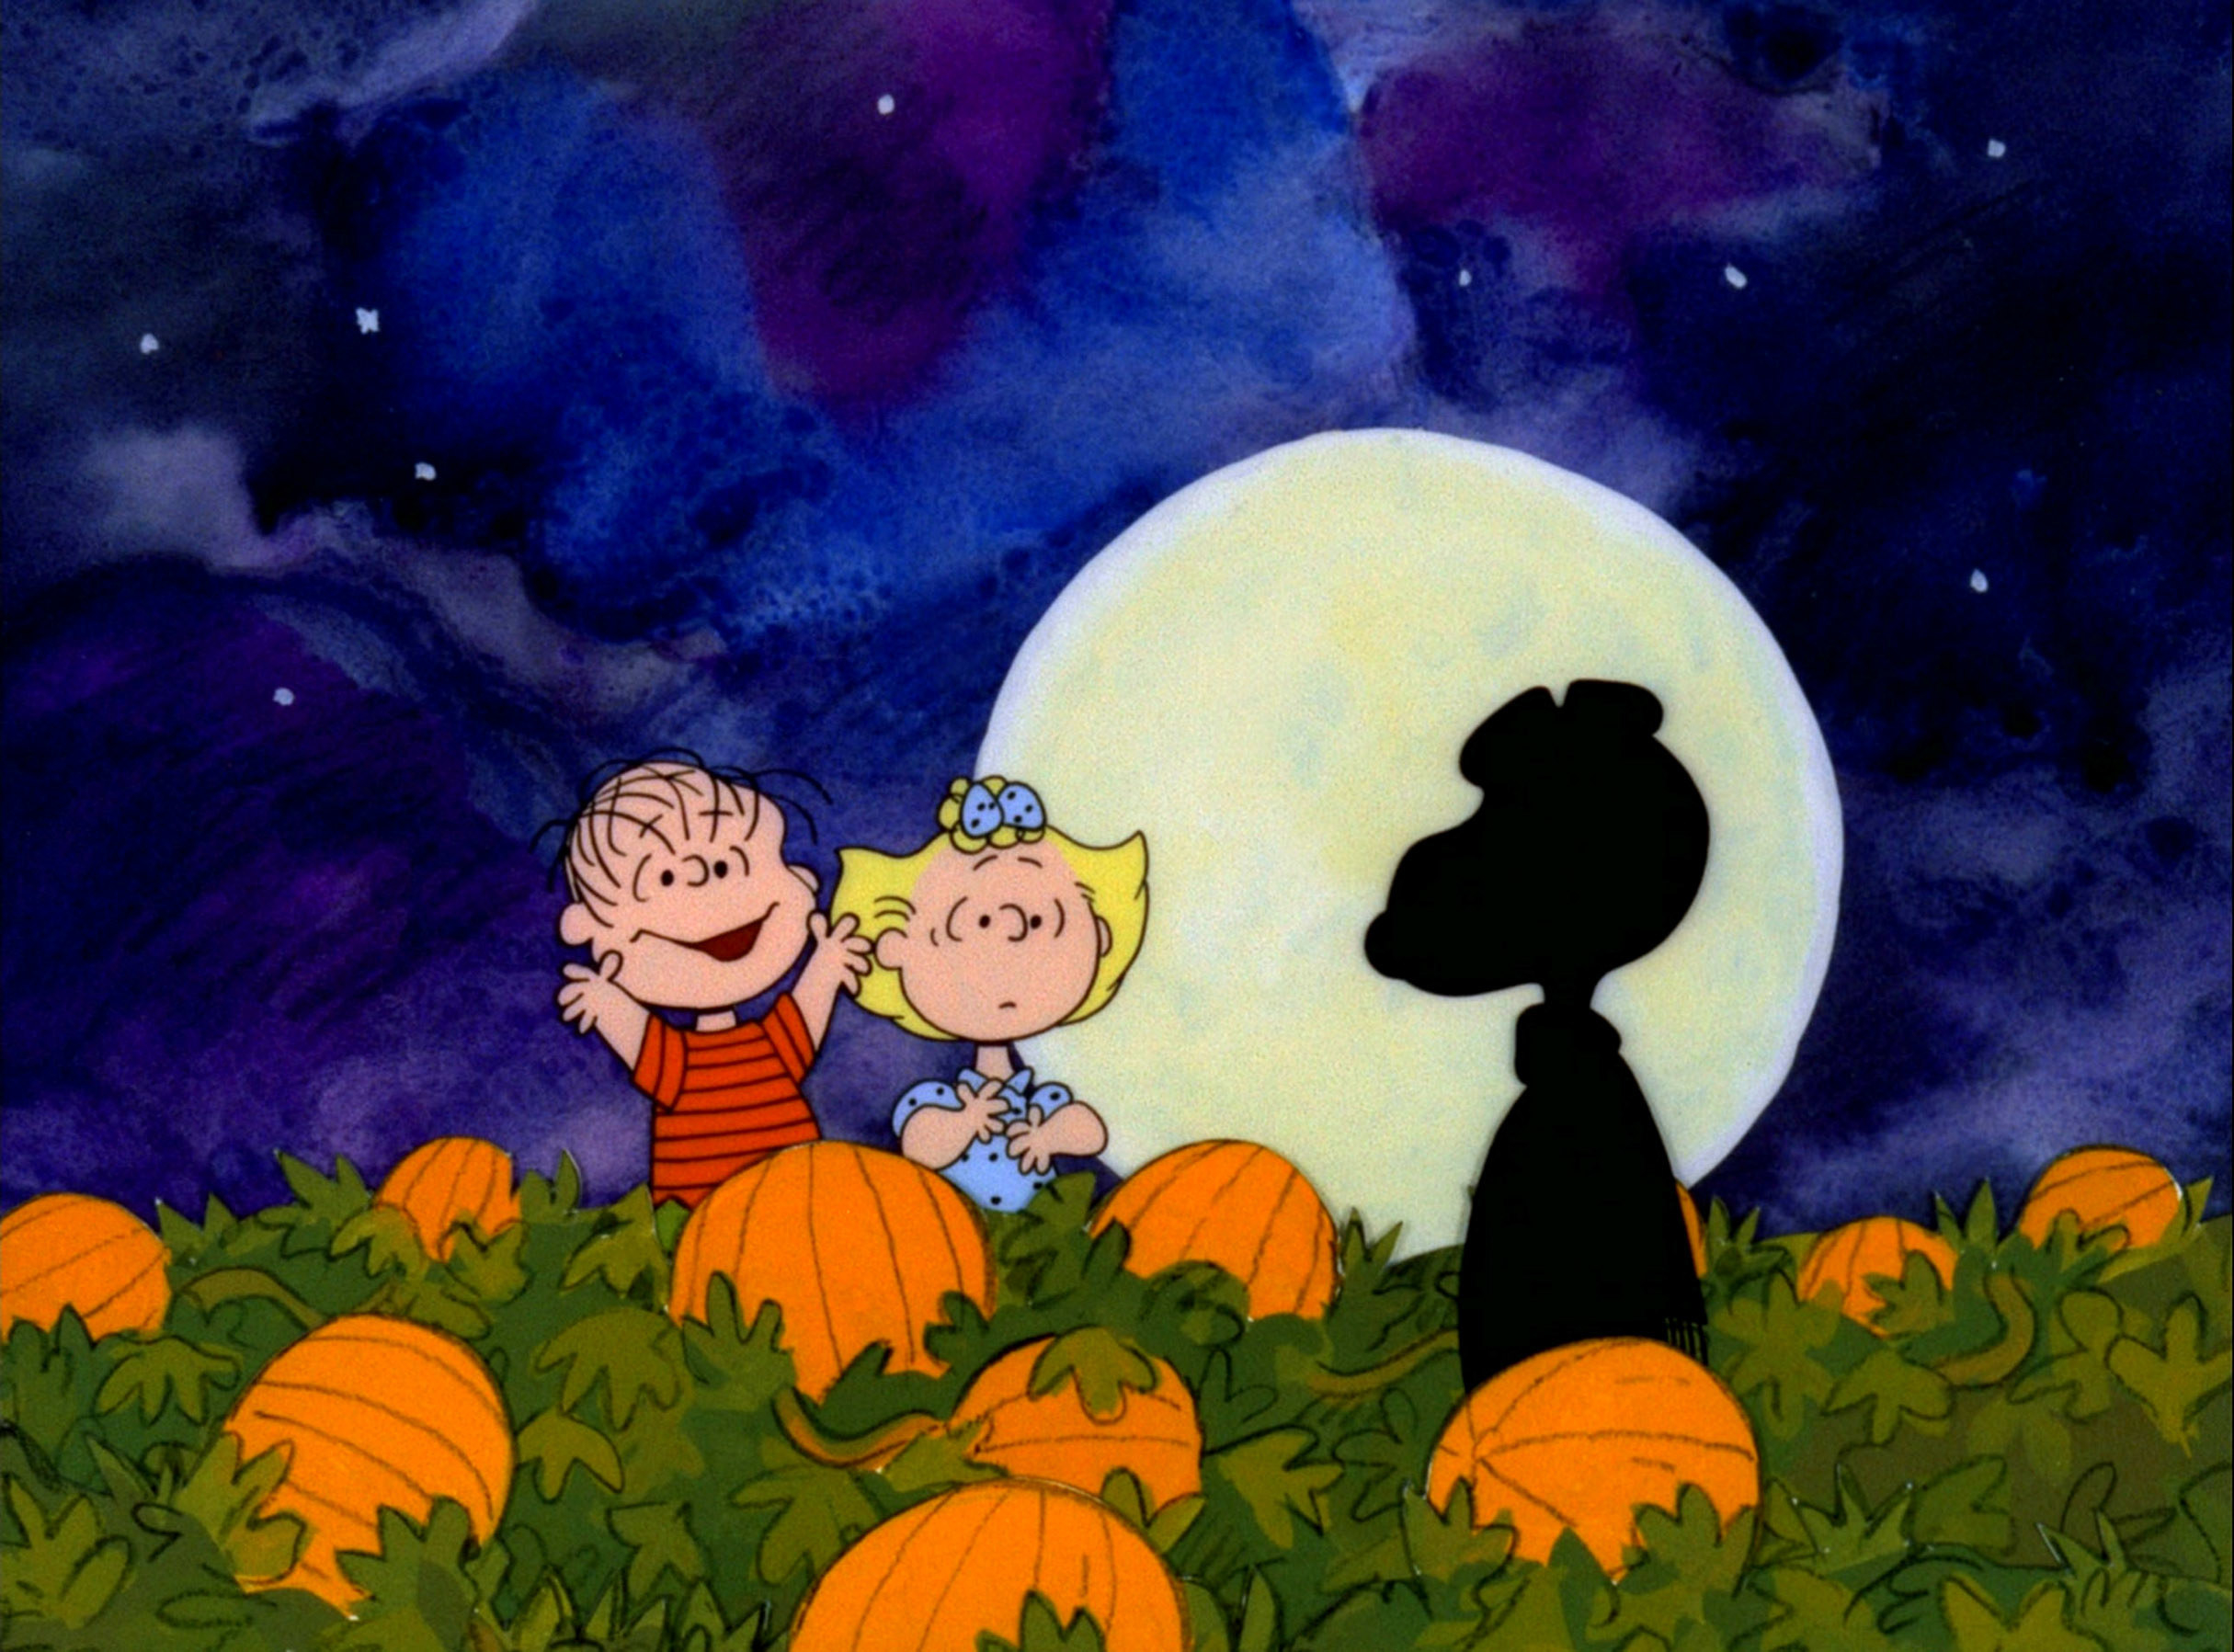 Linus and Lucy see Snoopy&#x27;s silhouette in a pumpkin patch